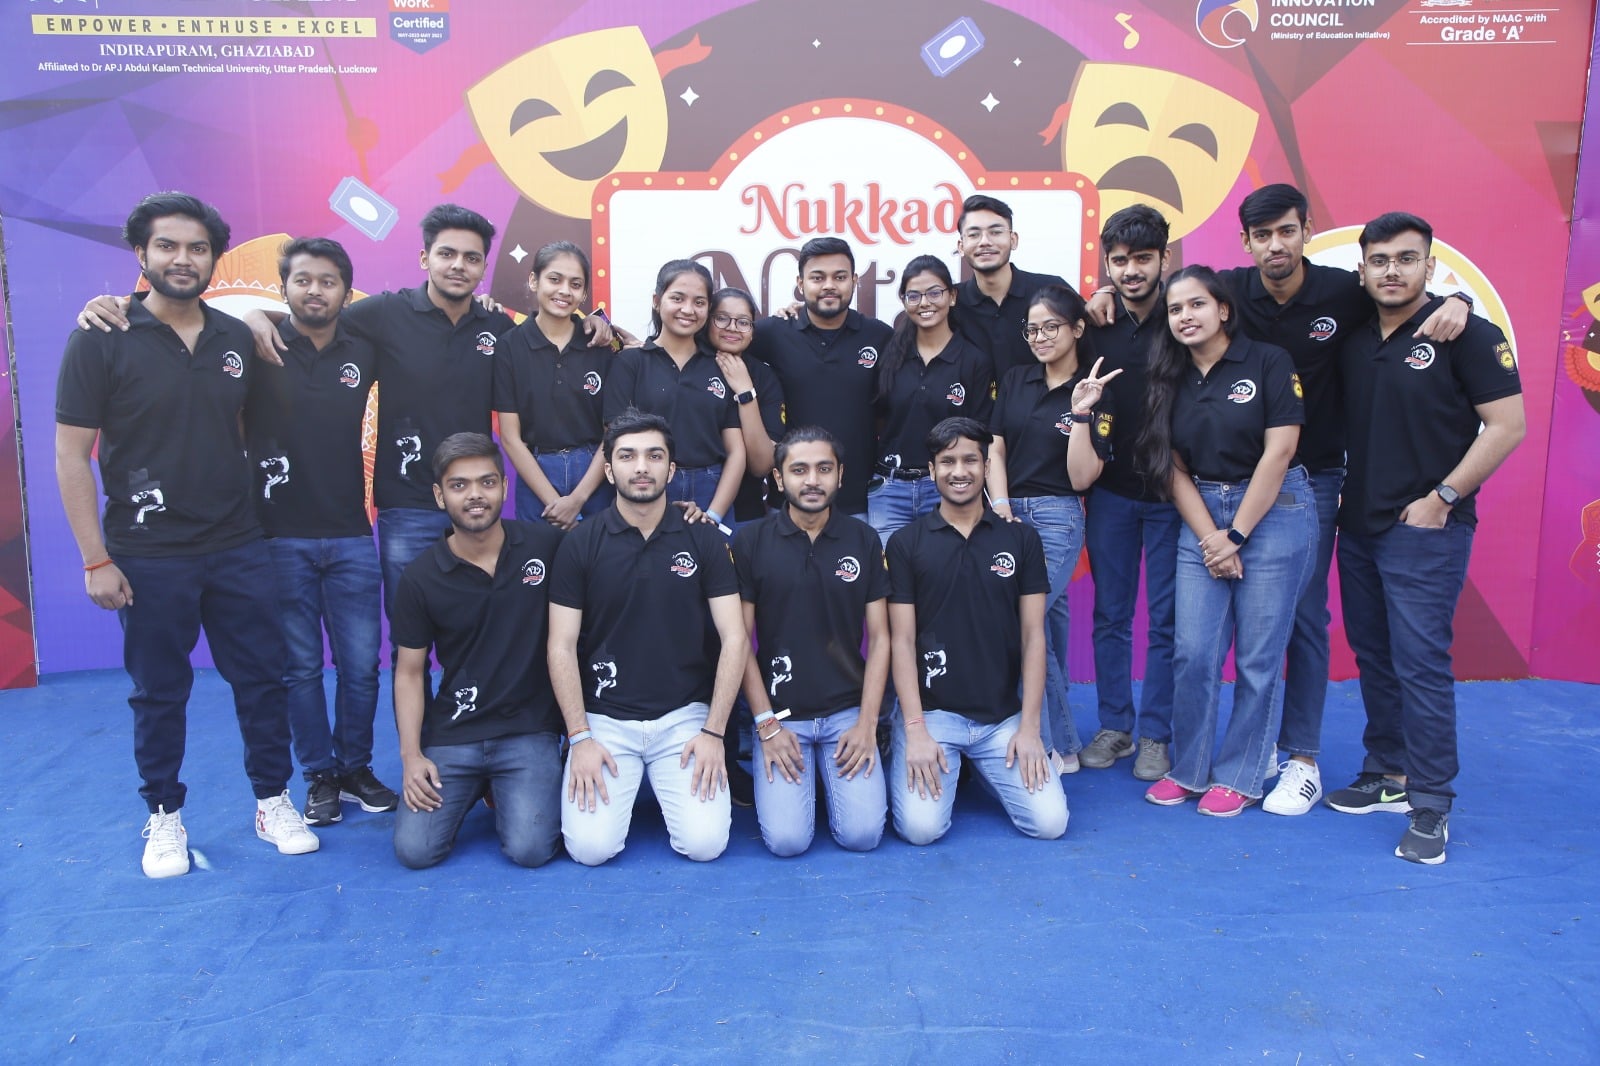 The proud ensemble of the Nukkad Natak 'Aawahan' gathered for a team portrait at Mercato.